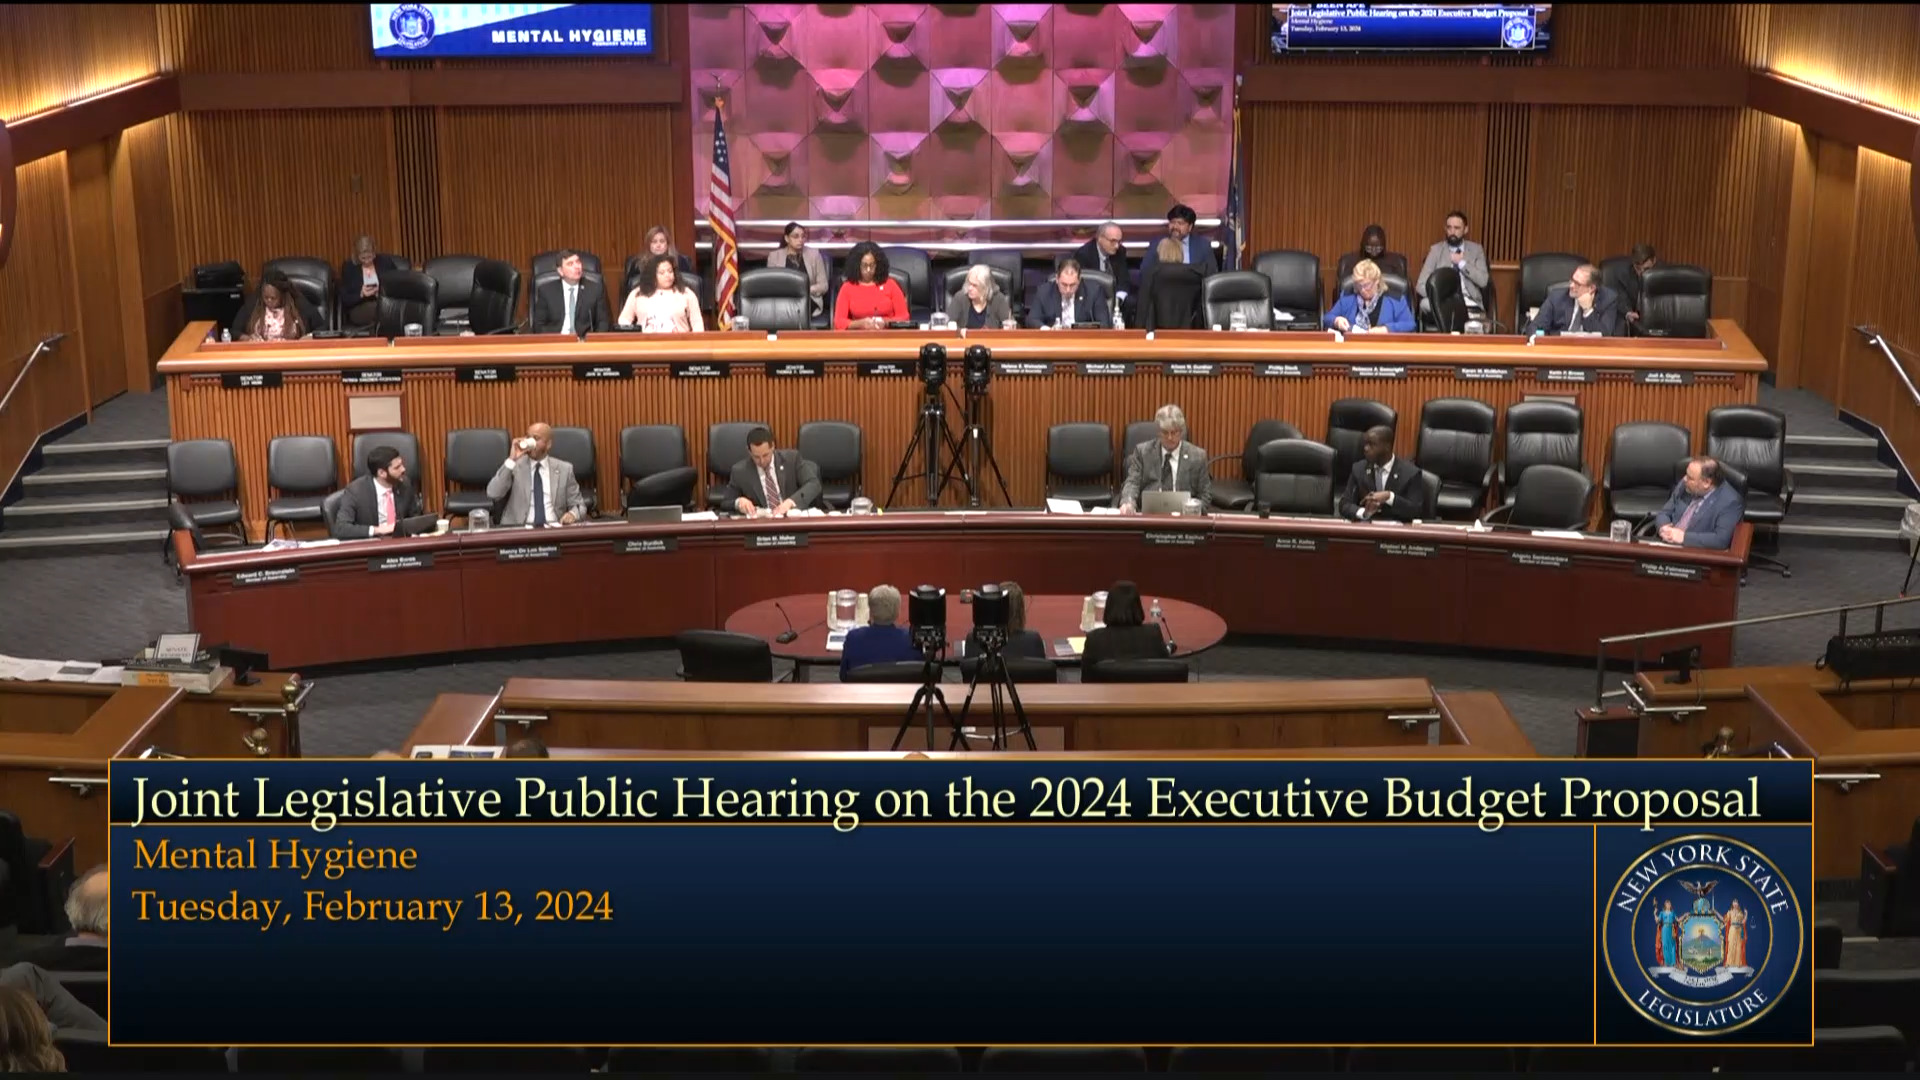 Commissioners Testify During Budget Hearing on Mental Hygiene